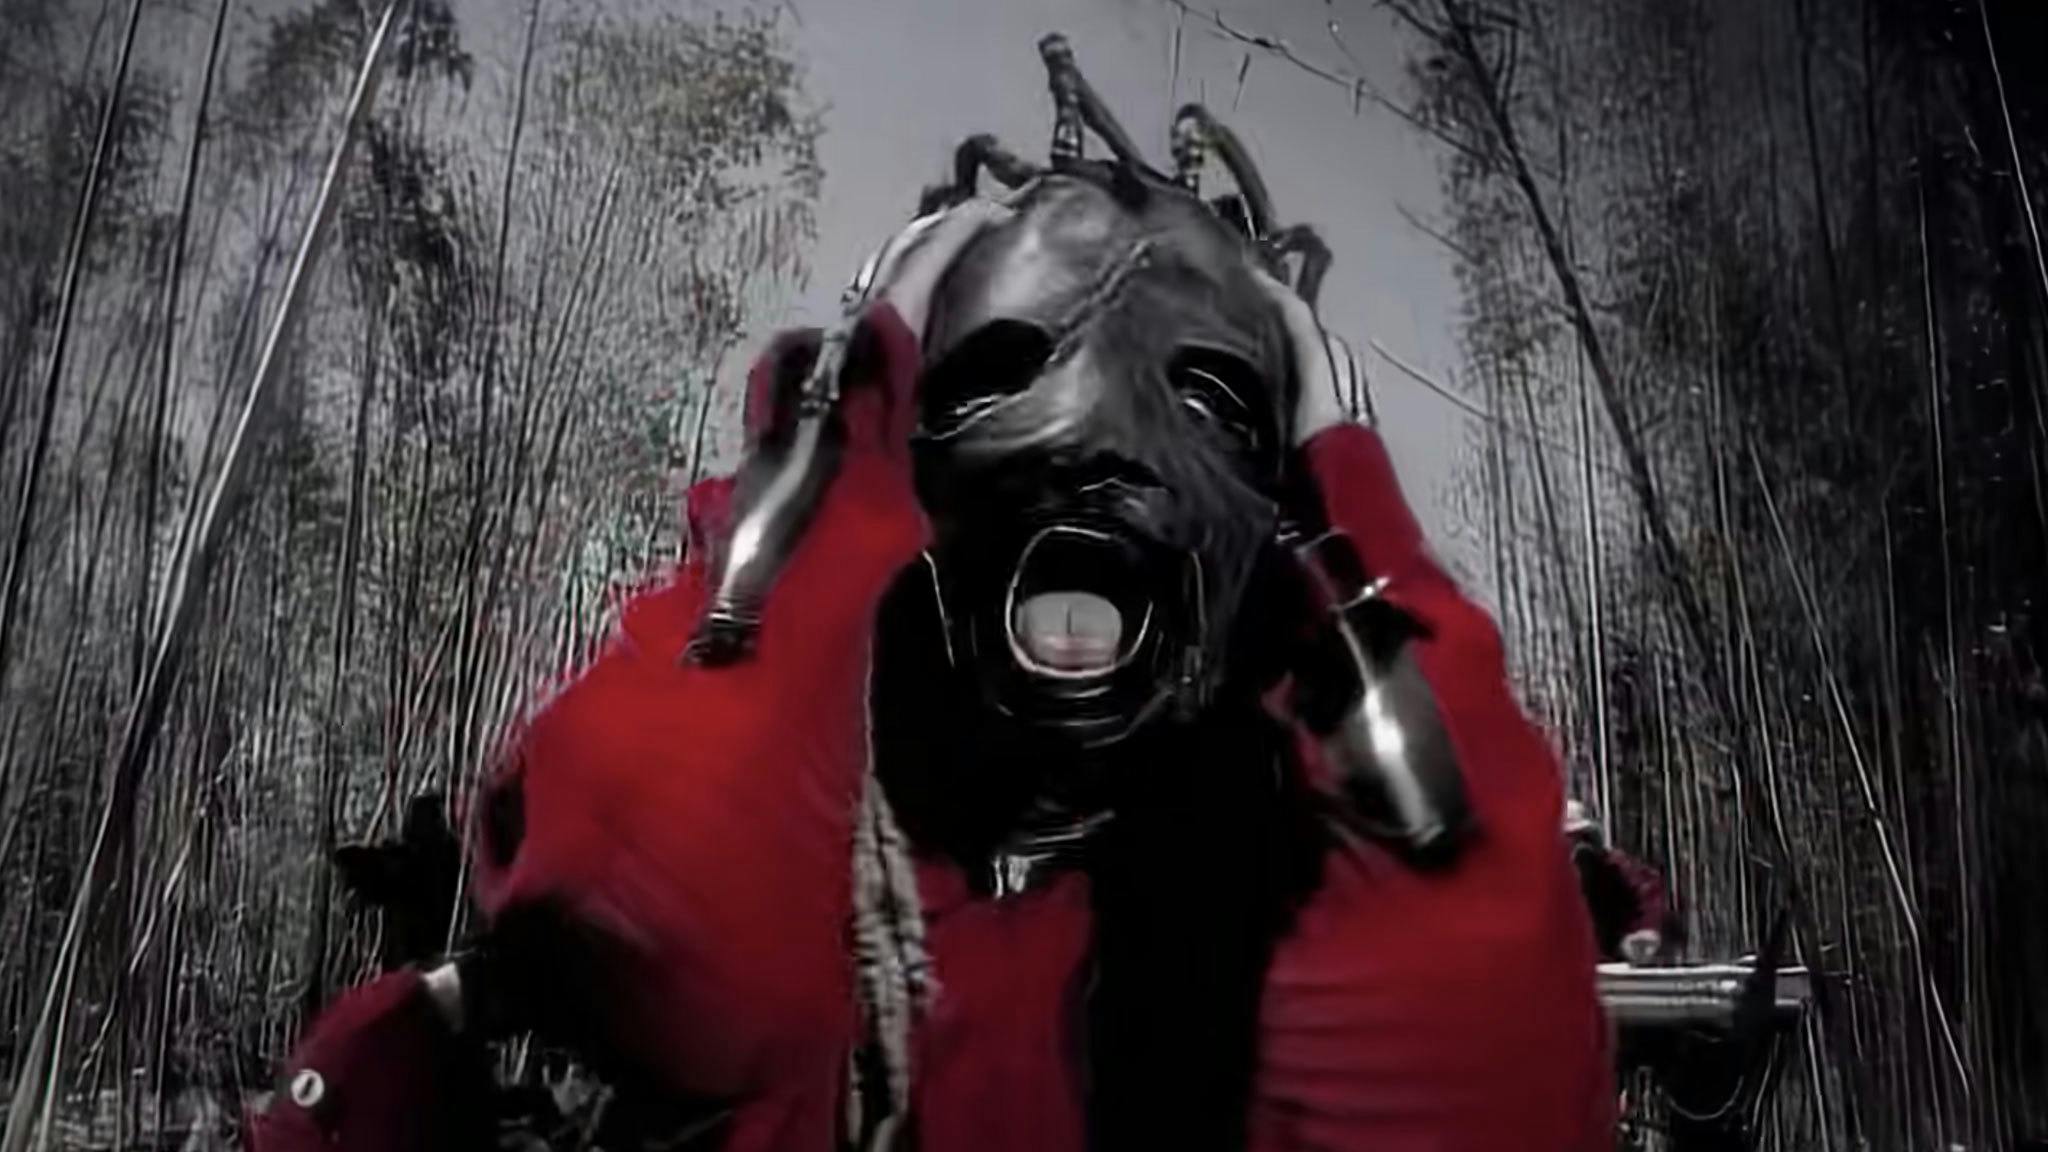 Slipknot have re-released all their old music videos in high-definition